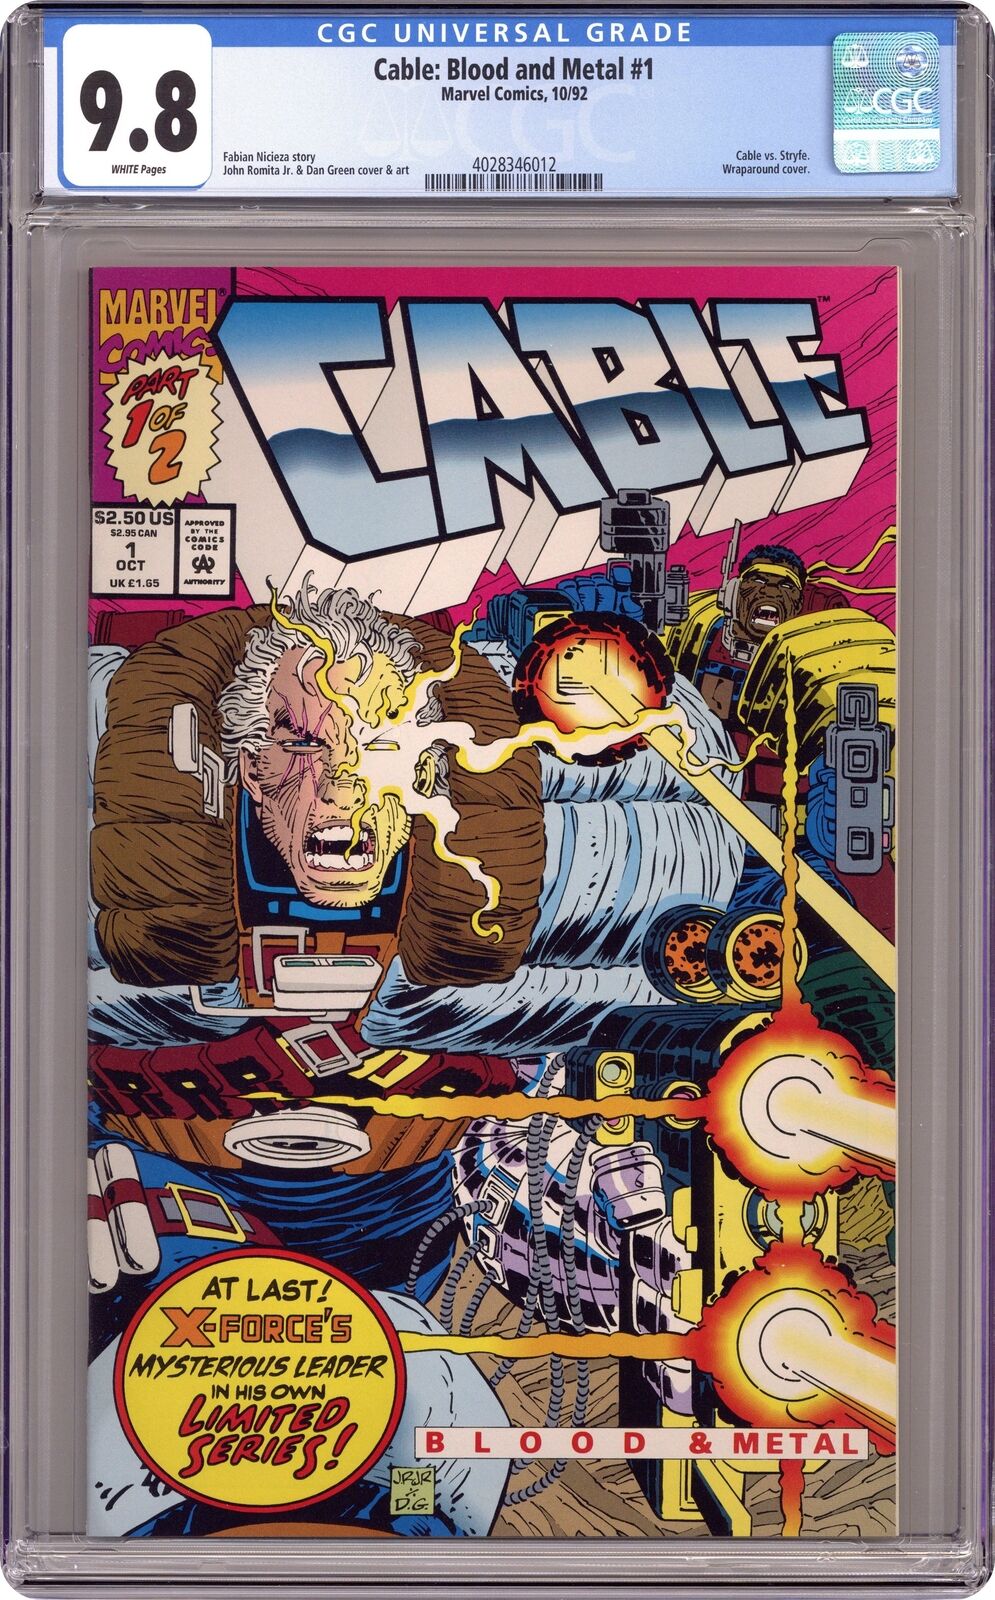 Cable Blood and Metal #1 CGC 9.8 1992 4028346012